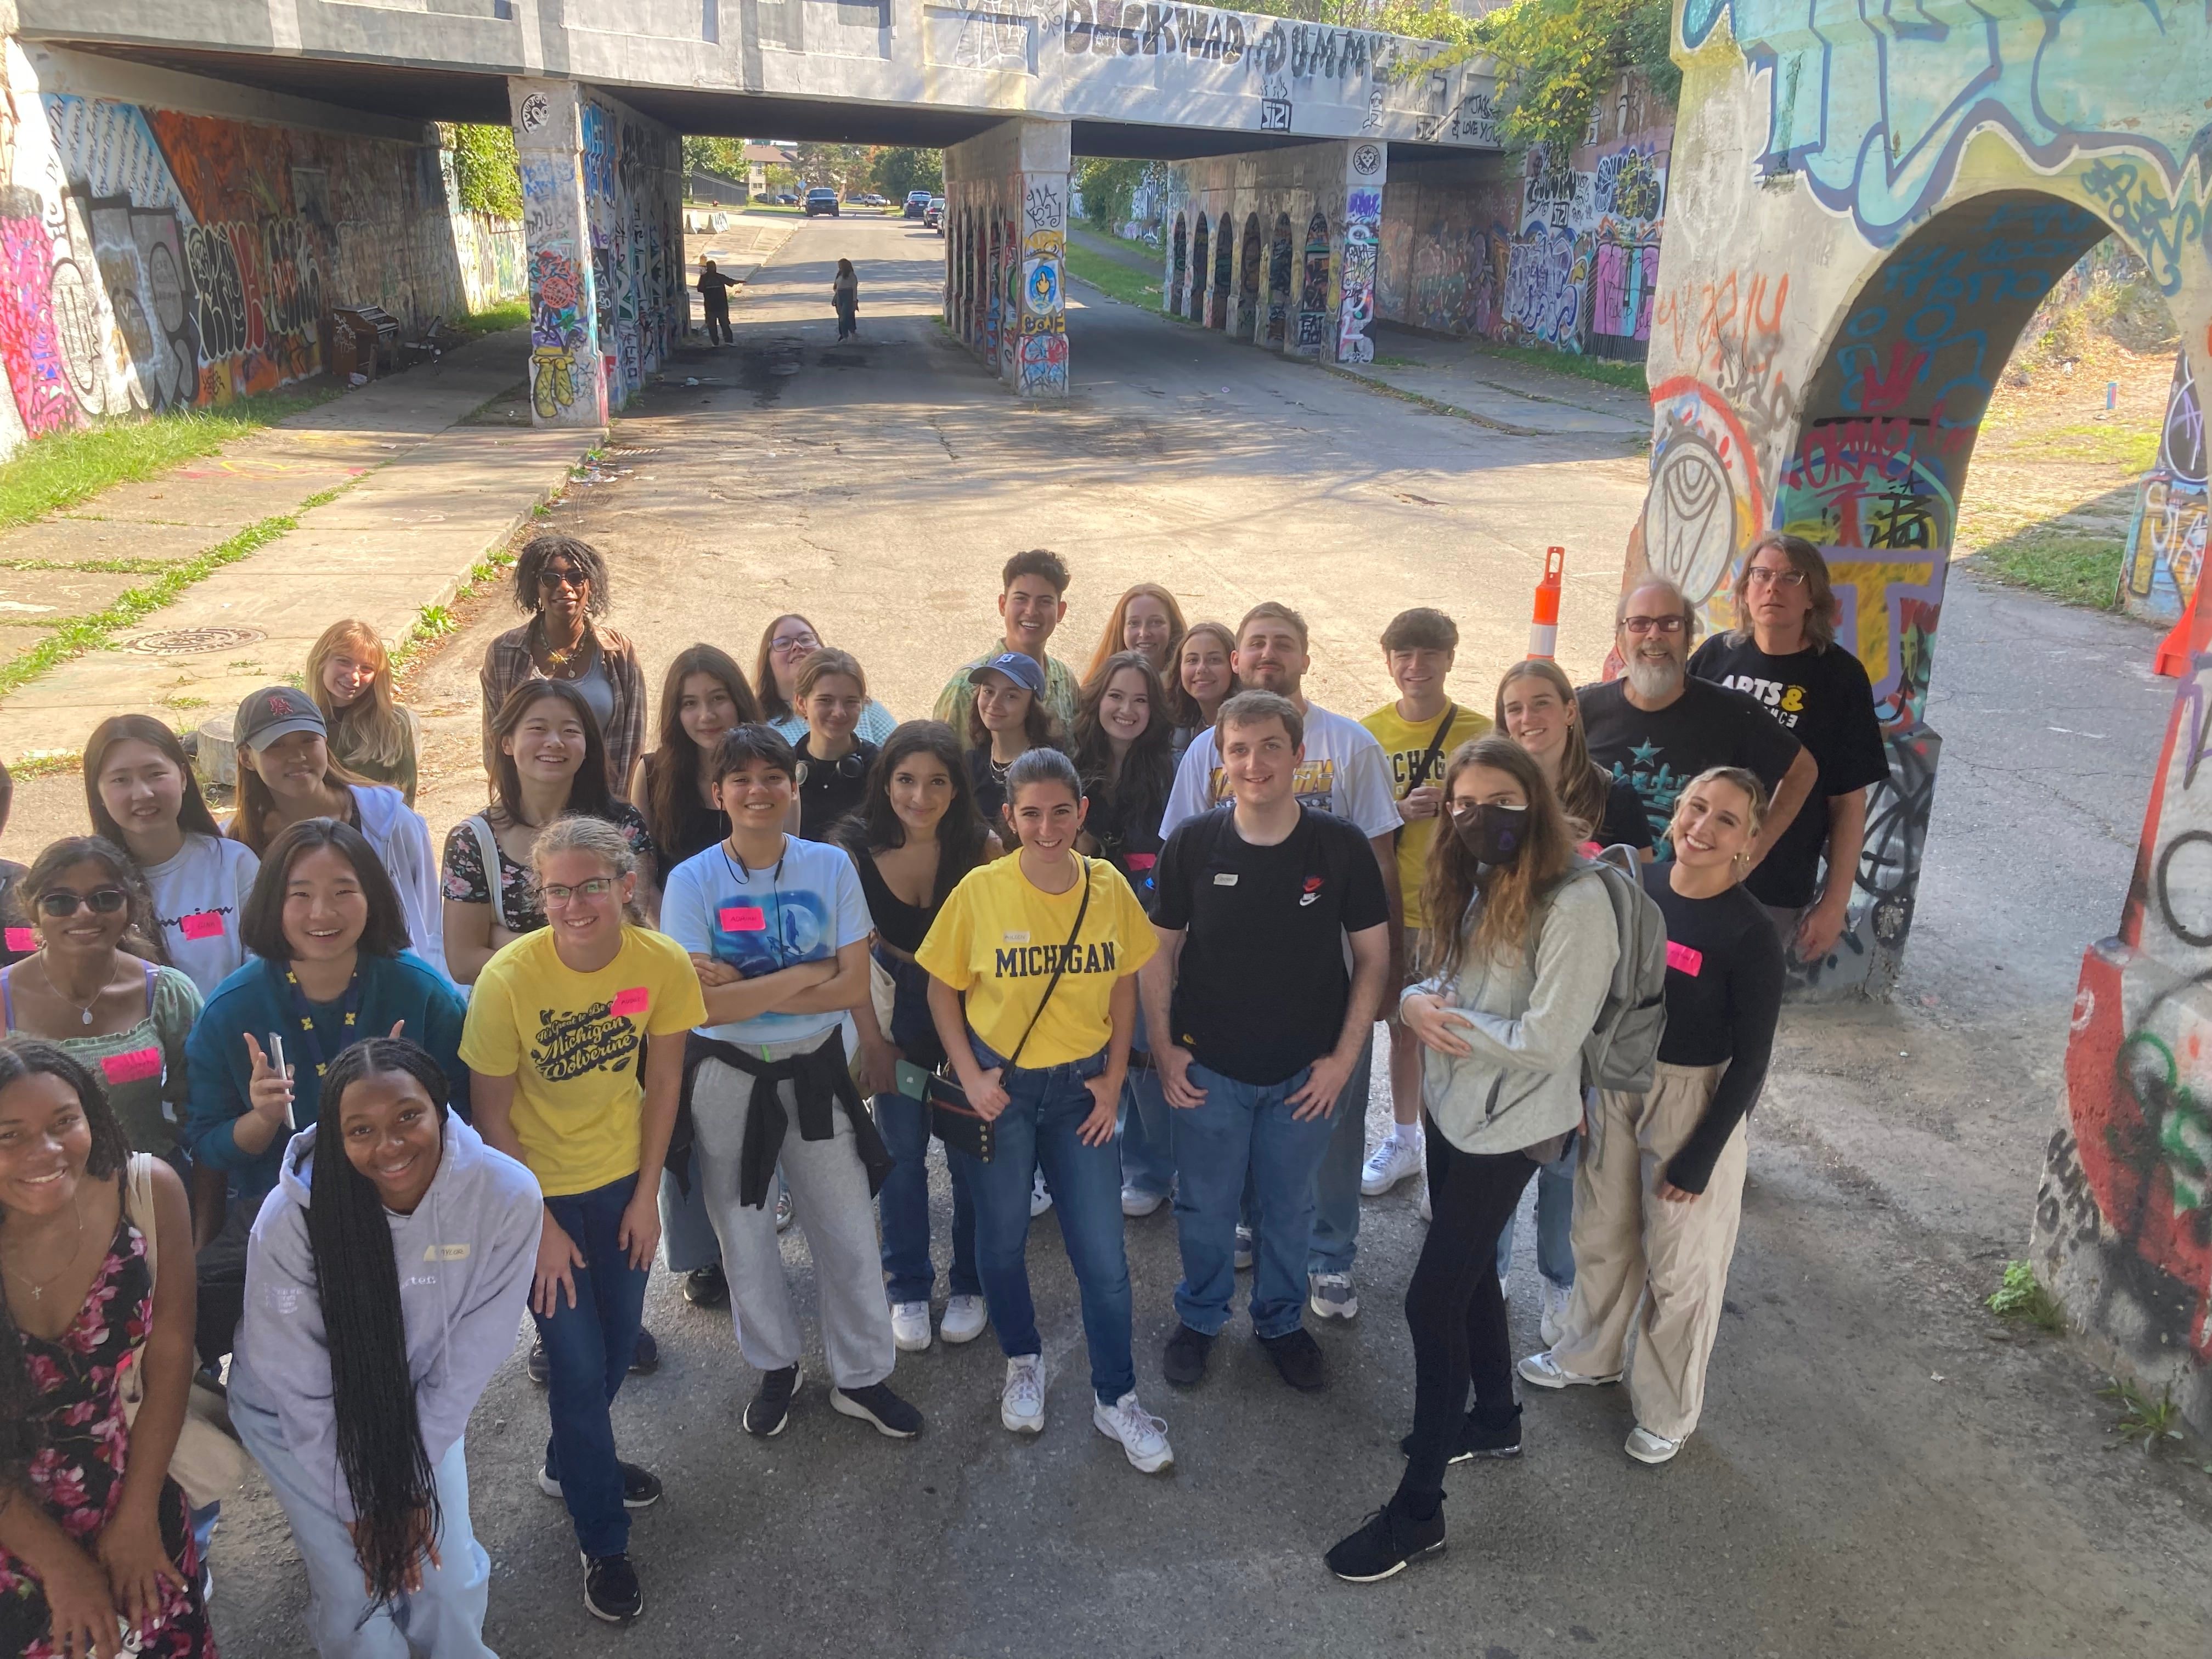 A diverse group of about 30 LSWA students pose in front a colorful, graffiti-covered highway underpass in Detroit. They are smiling.